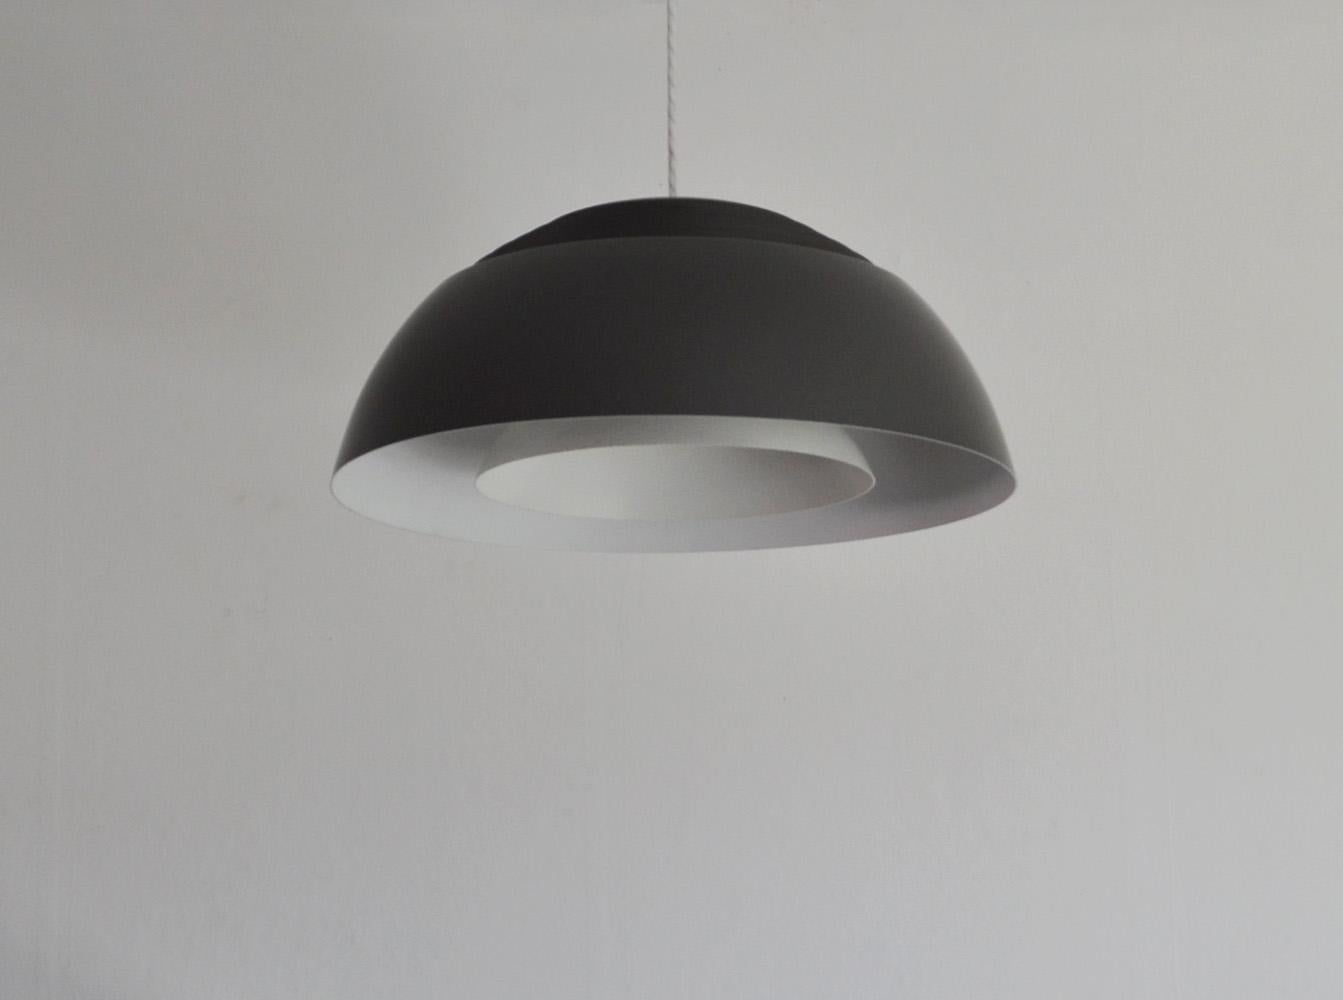 Arne Jacobsen designed the AJ Royal pendant lamp for the SAS Royal Hotel in Copenhagen in 1957. It was manufactured by Louis Poulsen.
The white lacquered inner shades diffuses the light upwards and downwards, so this pendant lamp is very suitable